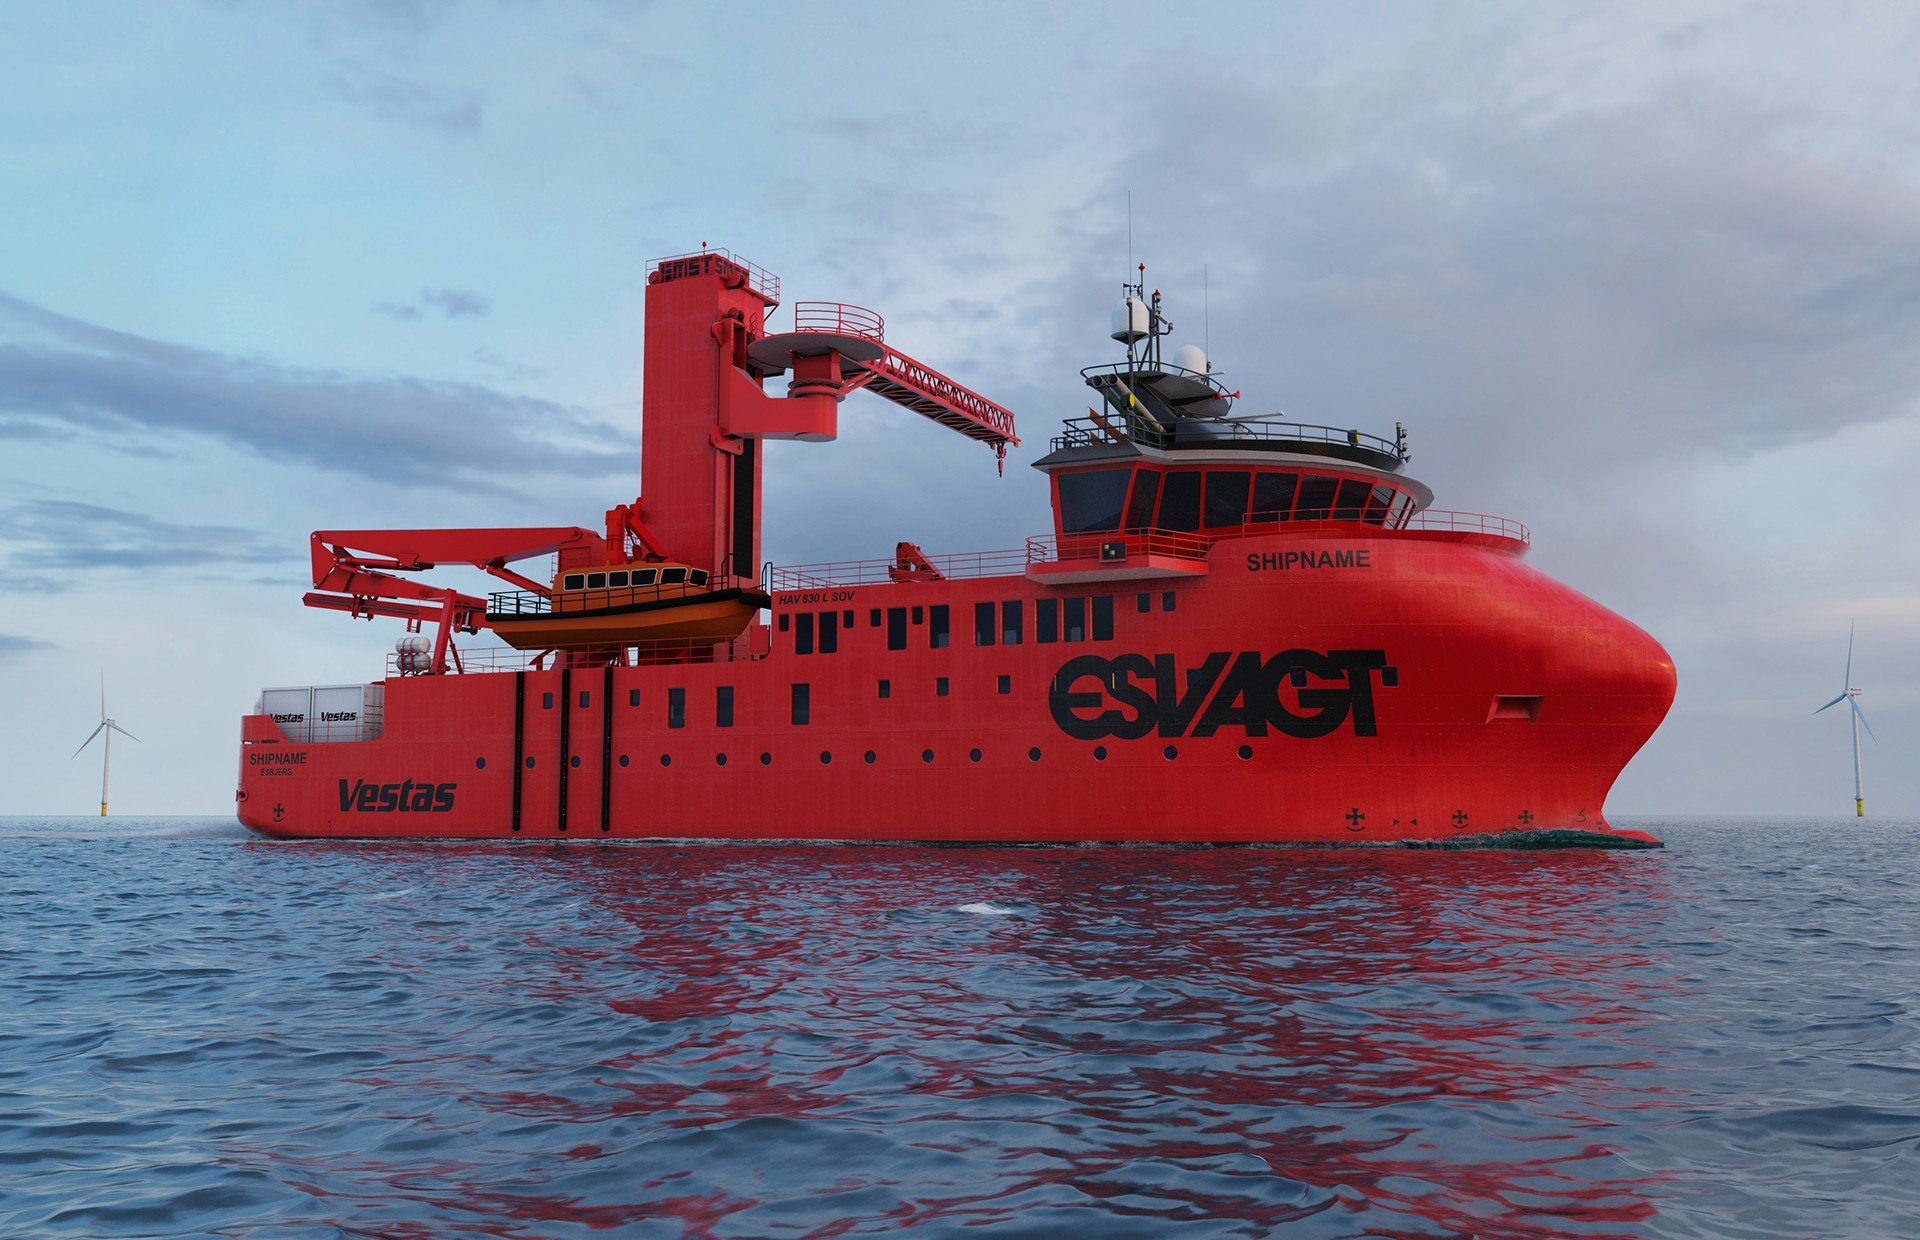 Danish Company ESVAGT AS Has Preferred Cemre Shipyard Again for Their New Project!